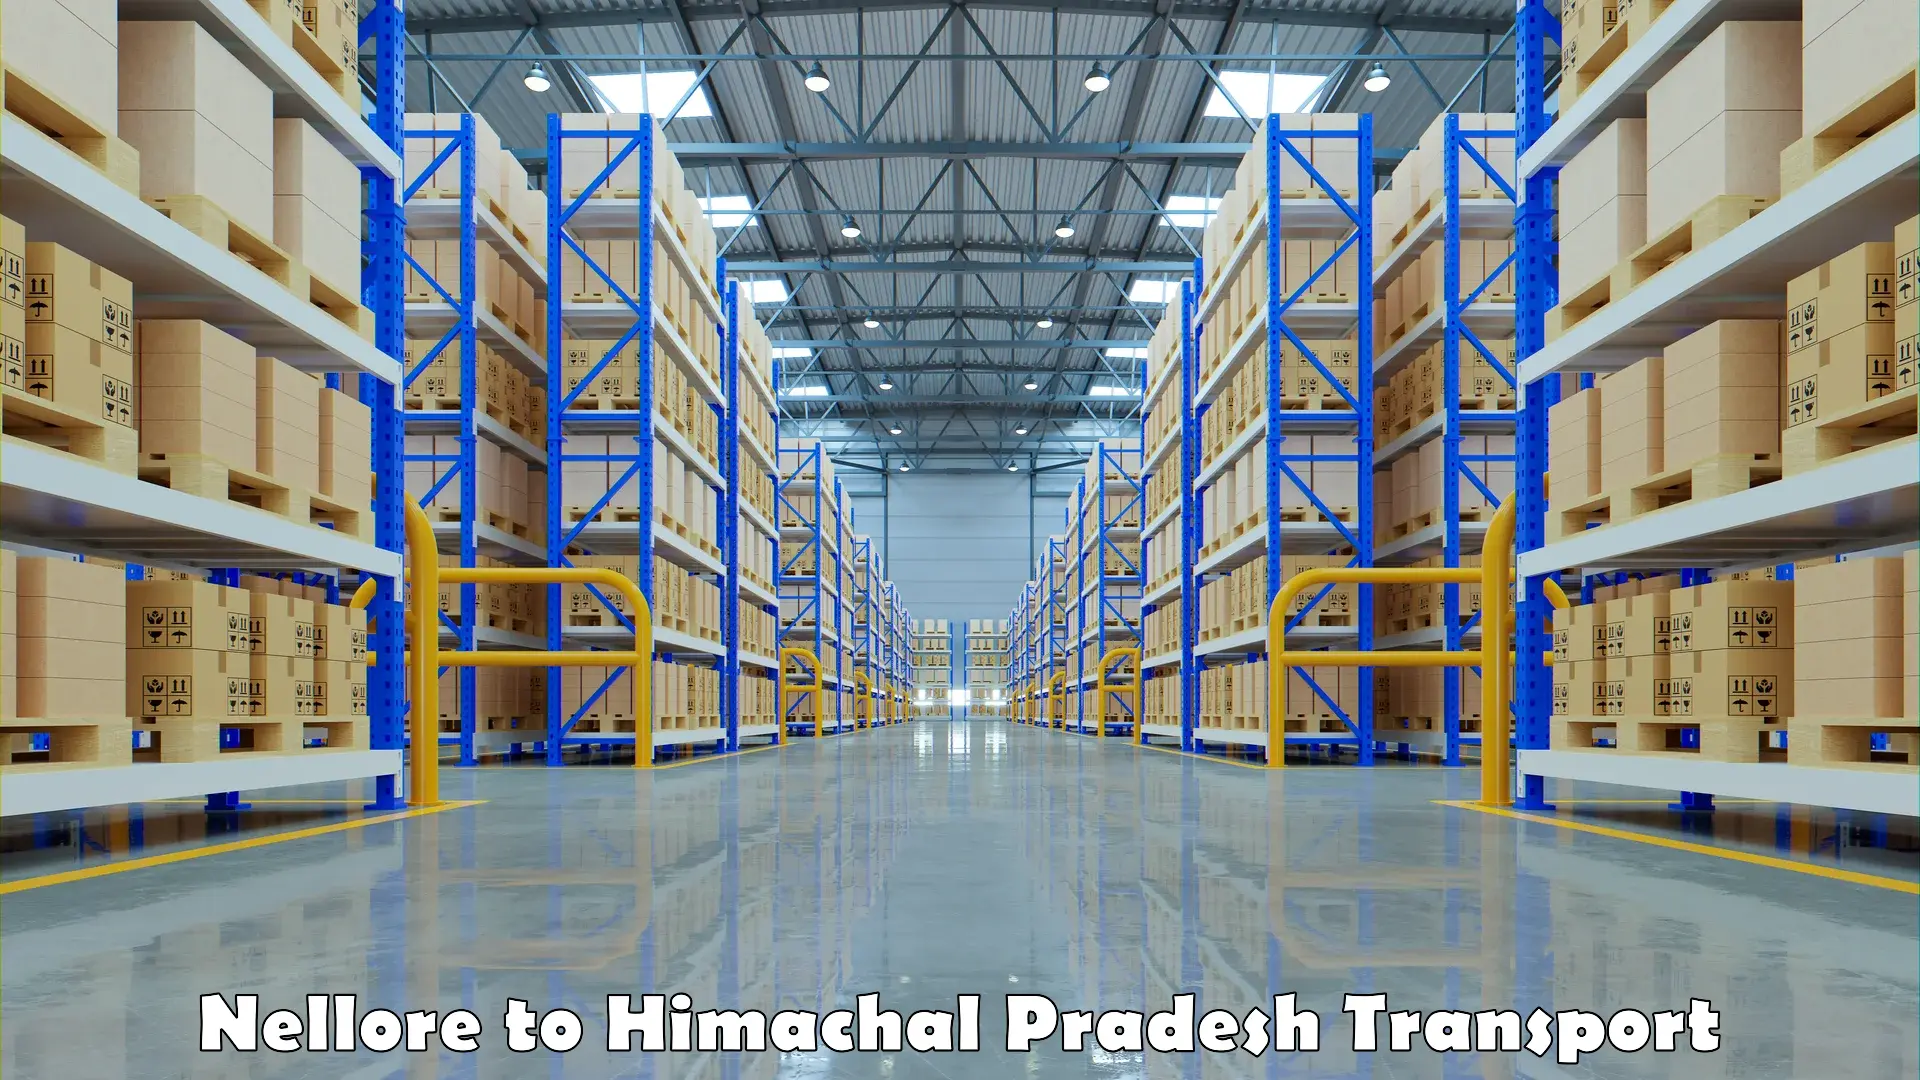 Nearby transport service Nellore to Himachal Pradesh